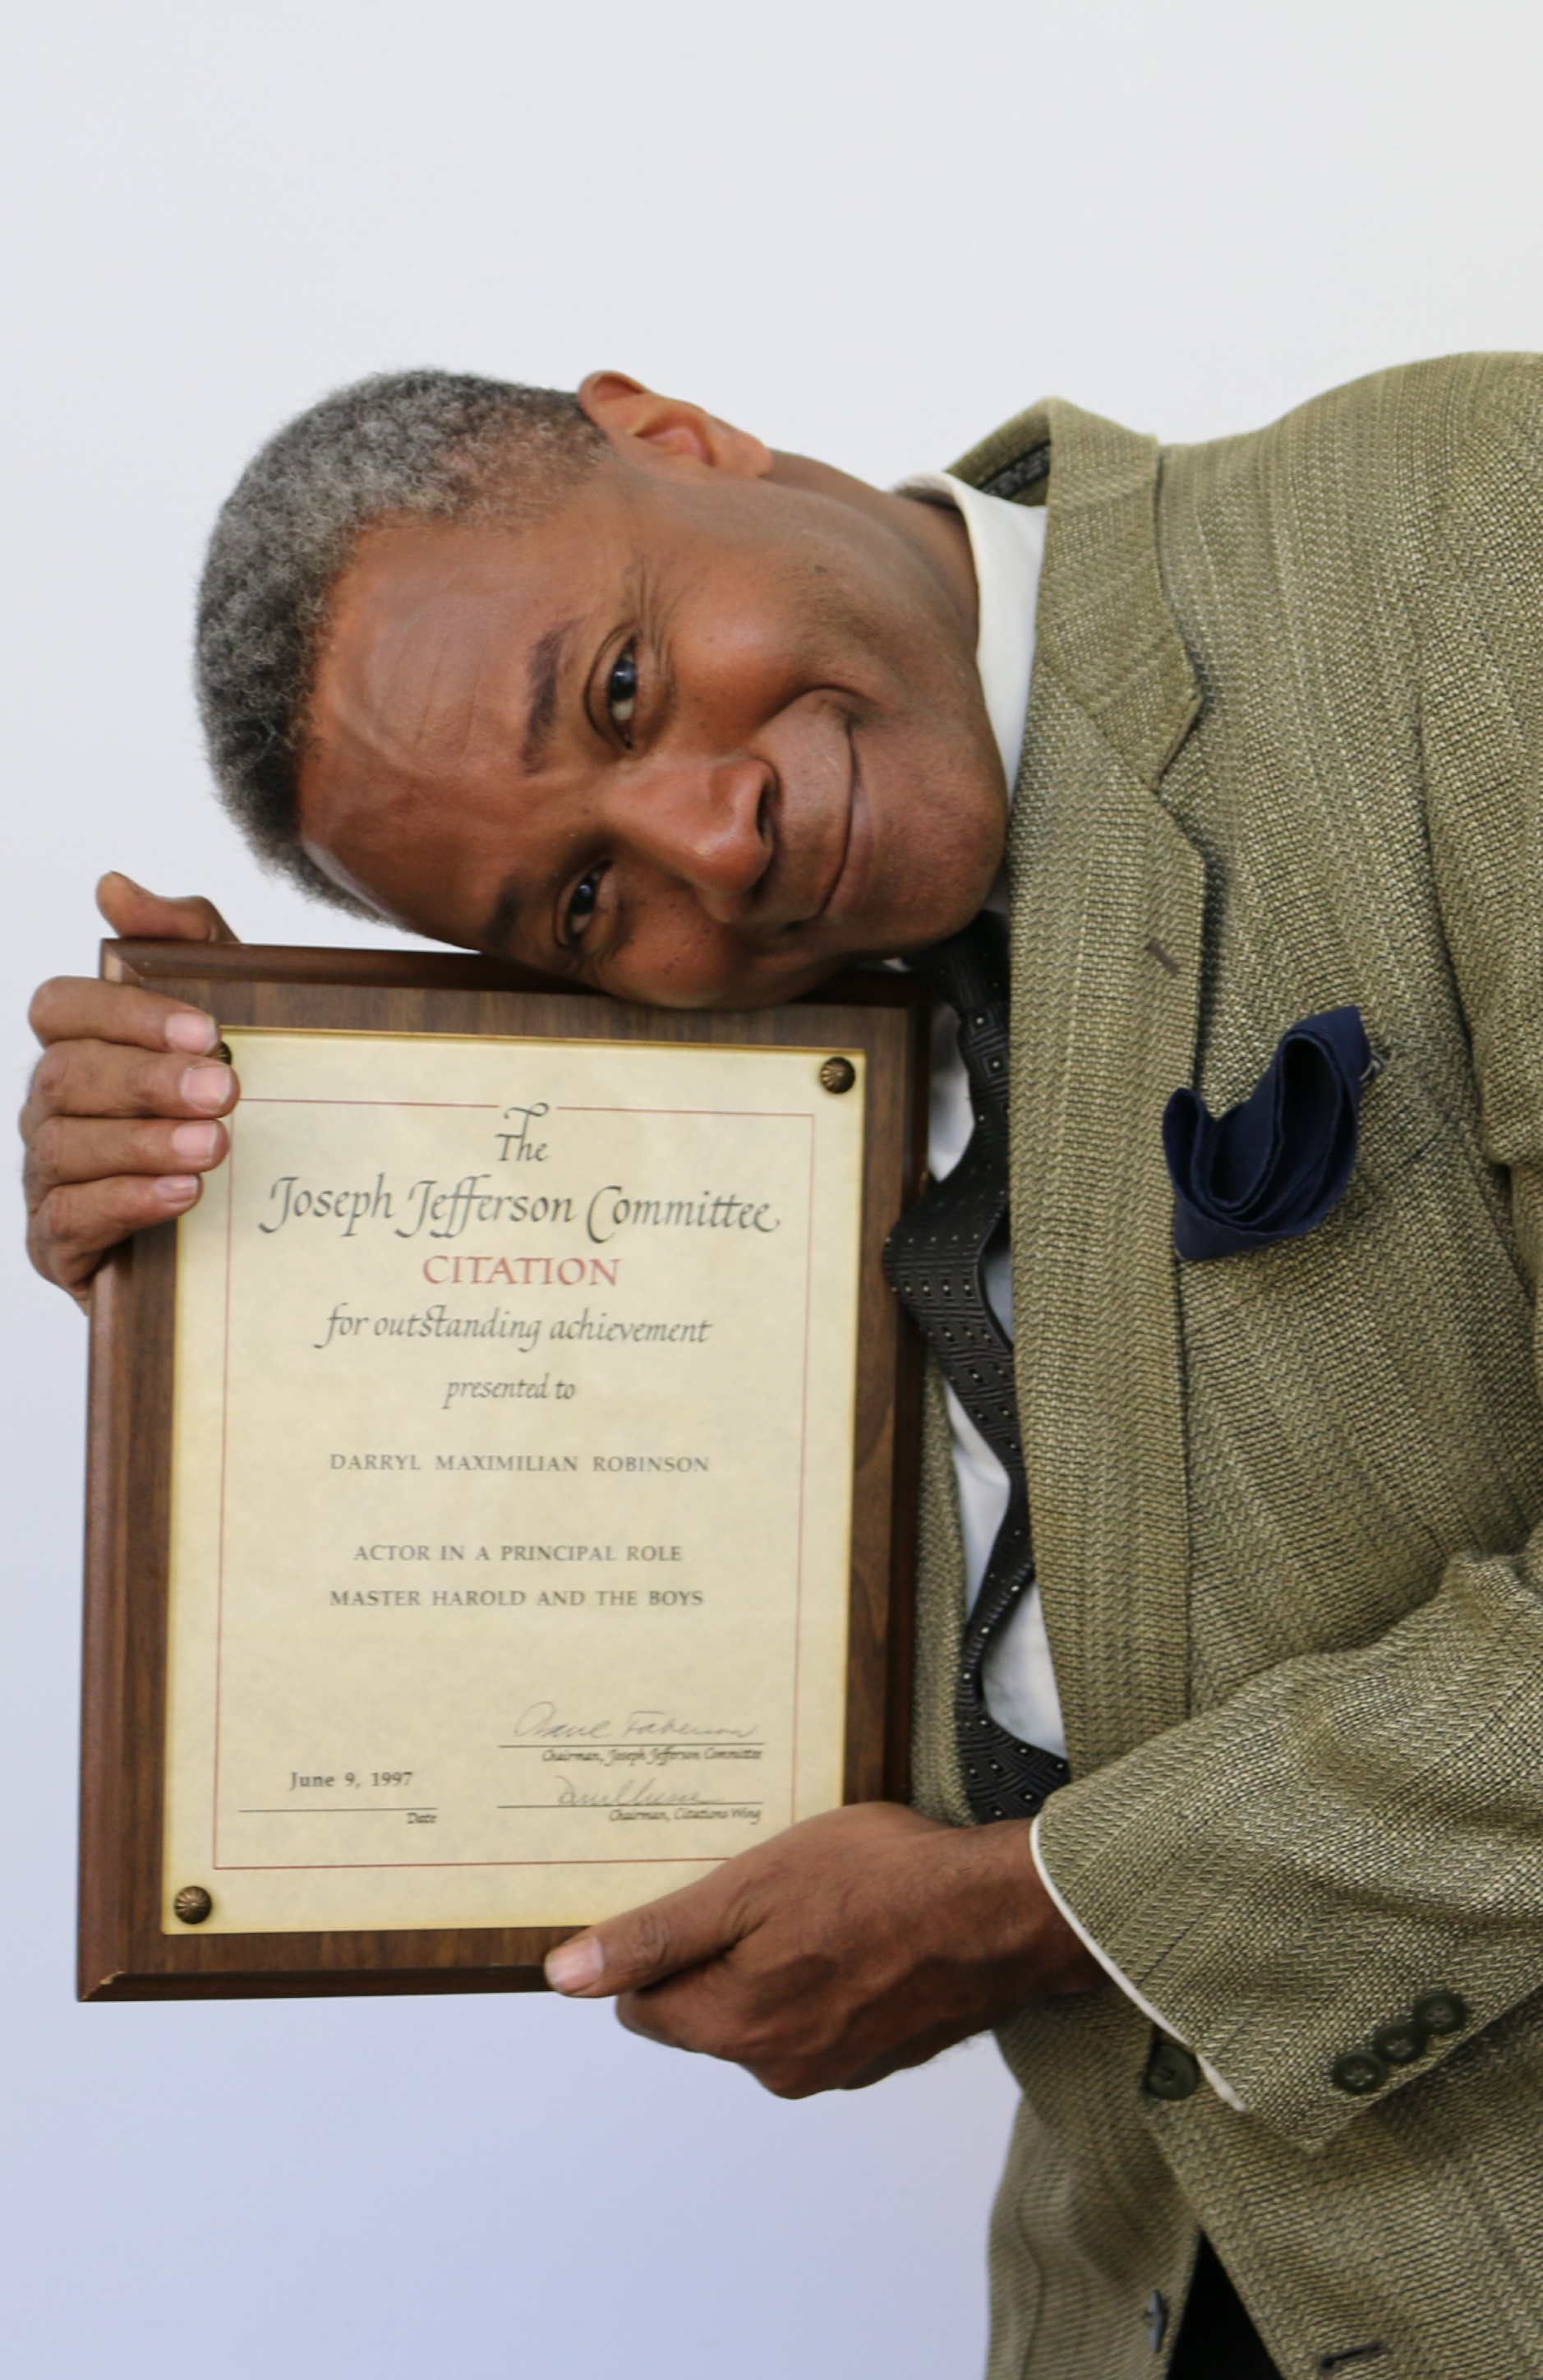 One With Multiple Honors: Winner of the 1981 Fort Wayne News-Sentinel Award for Outstanding Thespian, Darryl Maximilian Robinson also won a 1997 Chicago Jeff Citation Award for Best Actor.